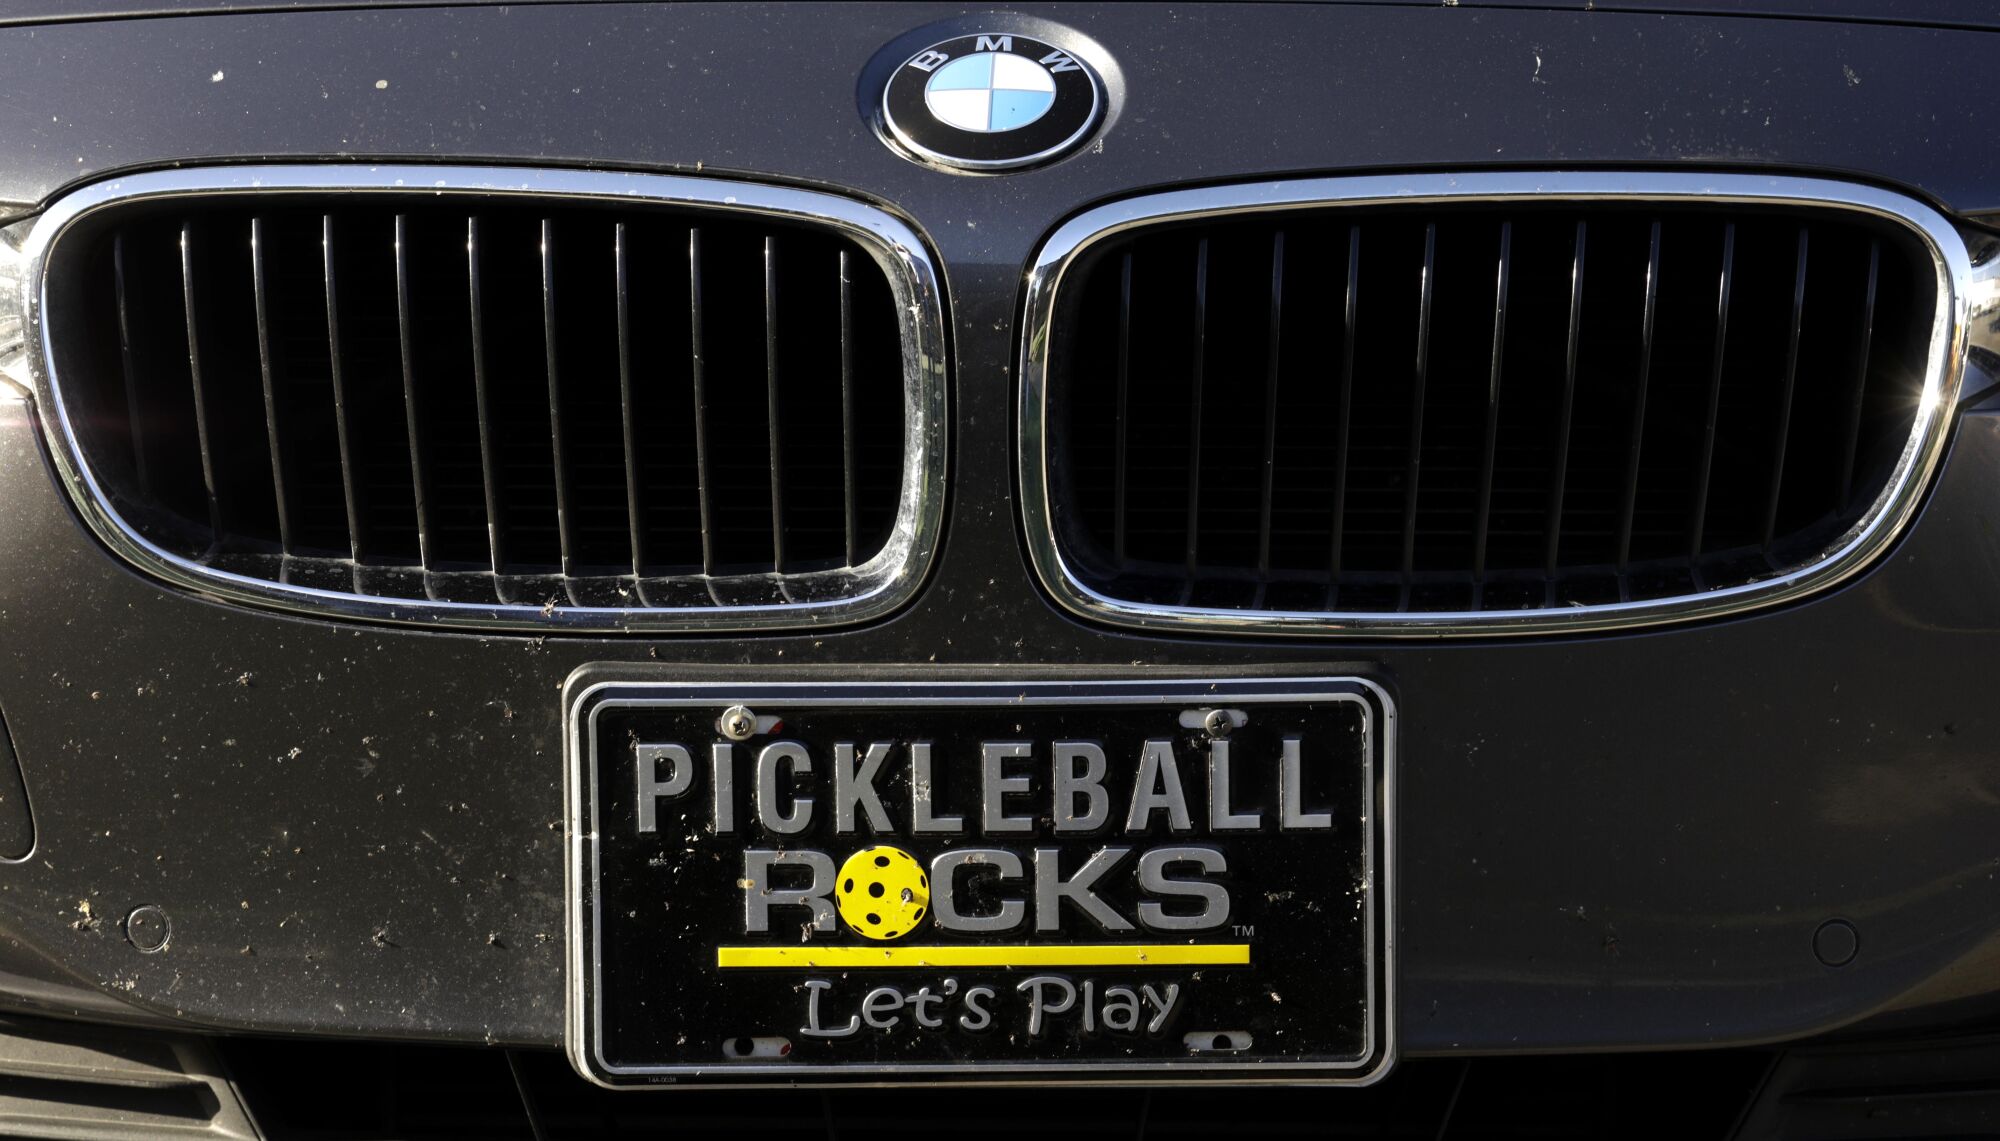 A car's front grill, with a "Pickleball rocks" license plate